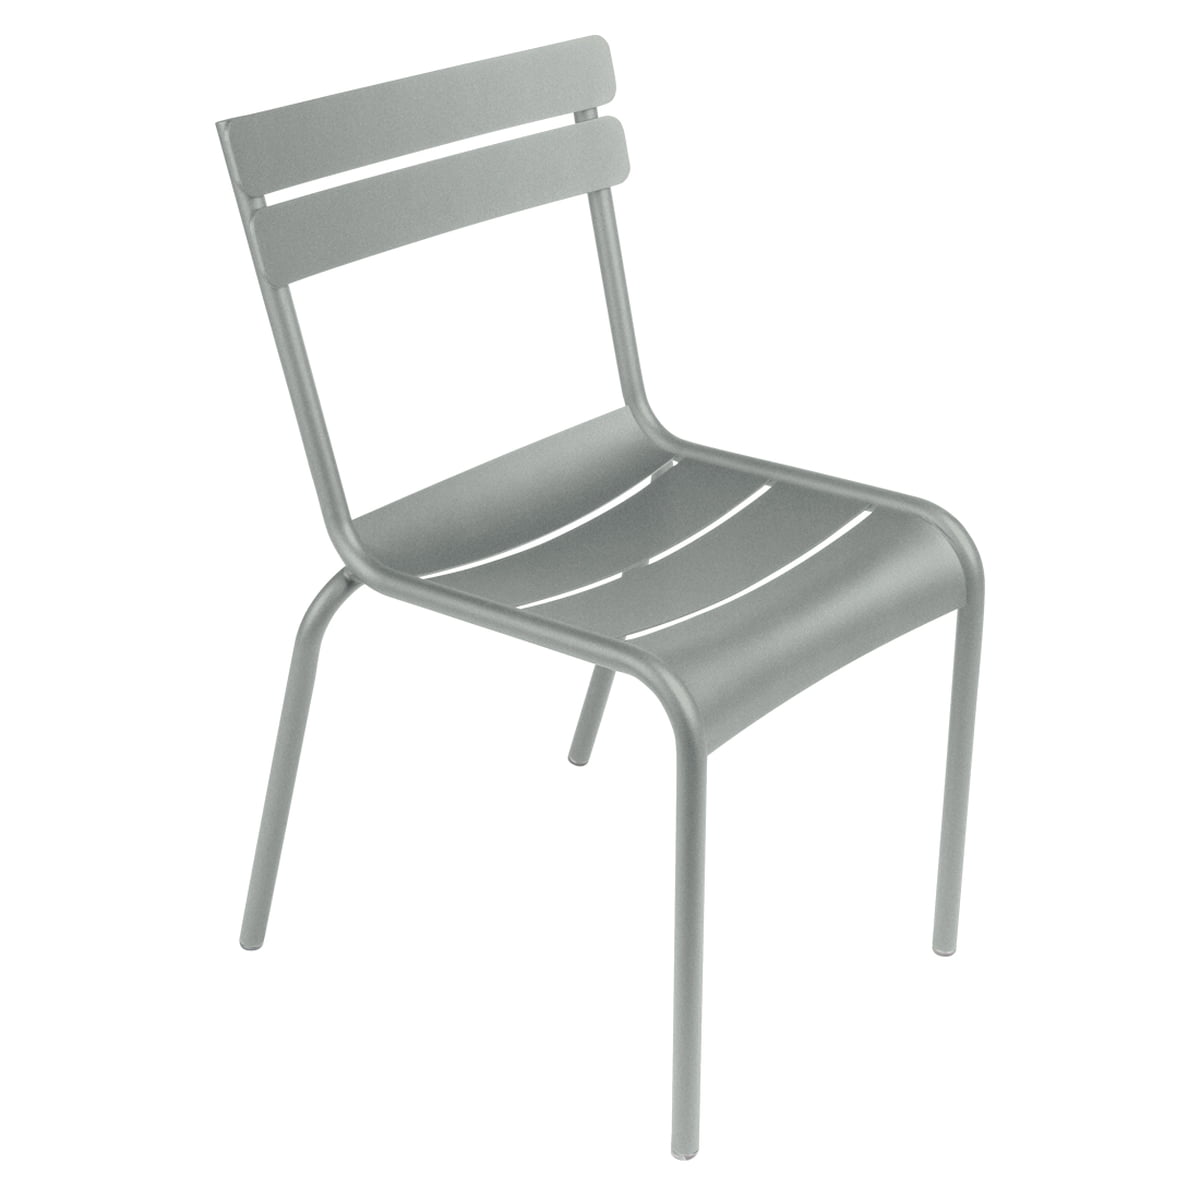 Fermob - Luxembourg chaise, gris lapilli